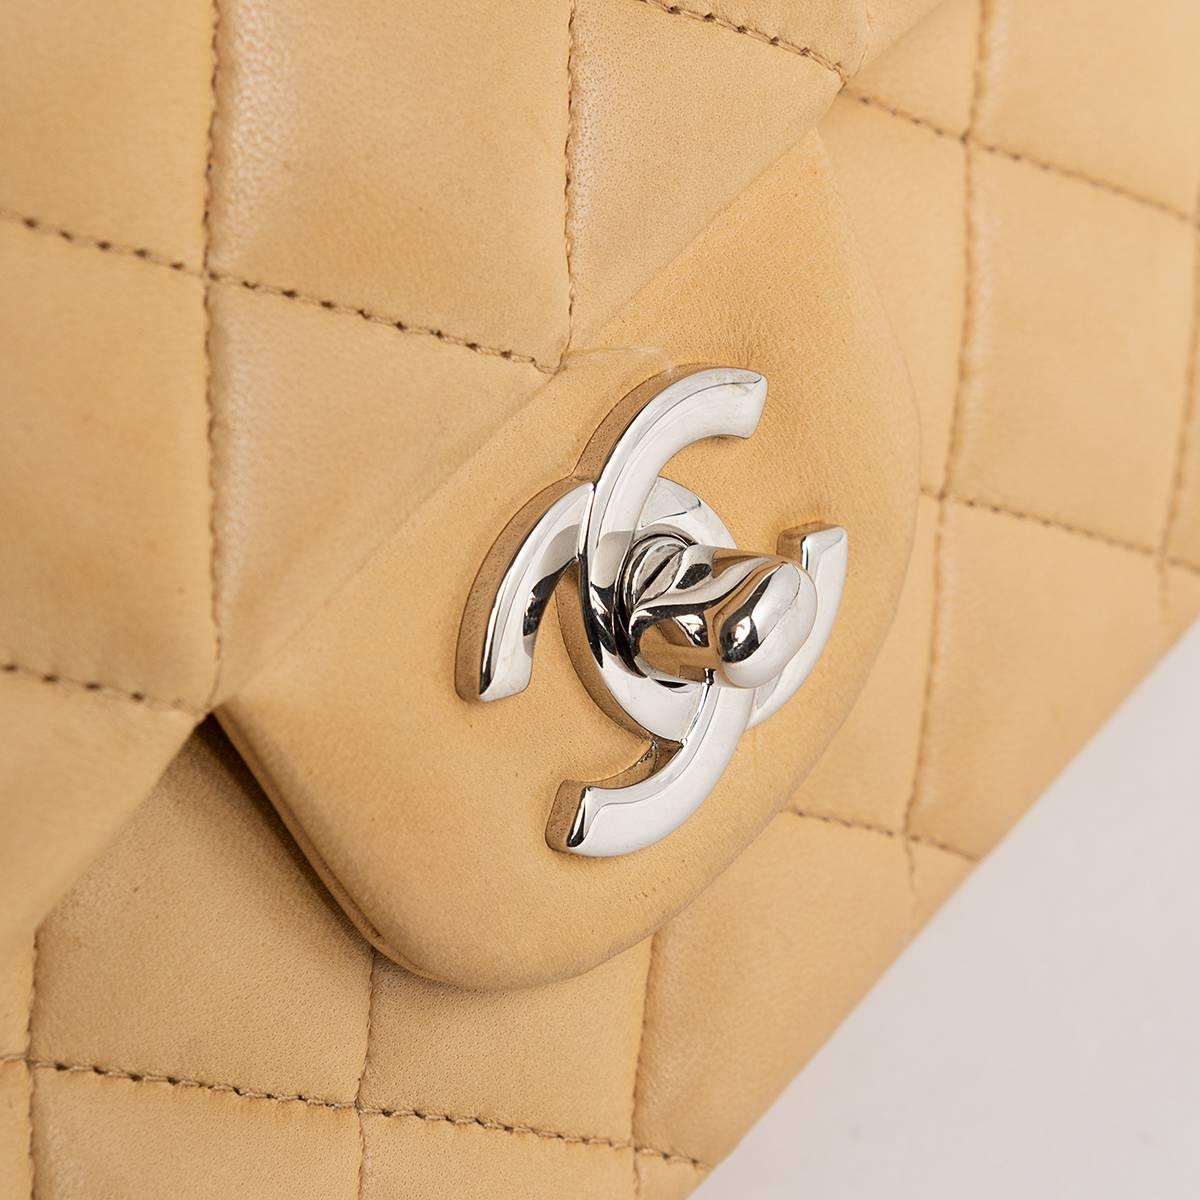 2005 Chanel 2.55 Quilted Matelasse Beige Lambskin  For Sale 4